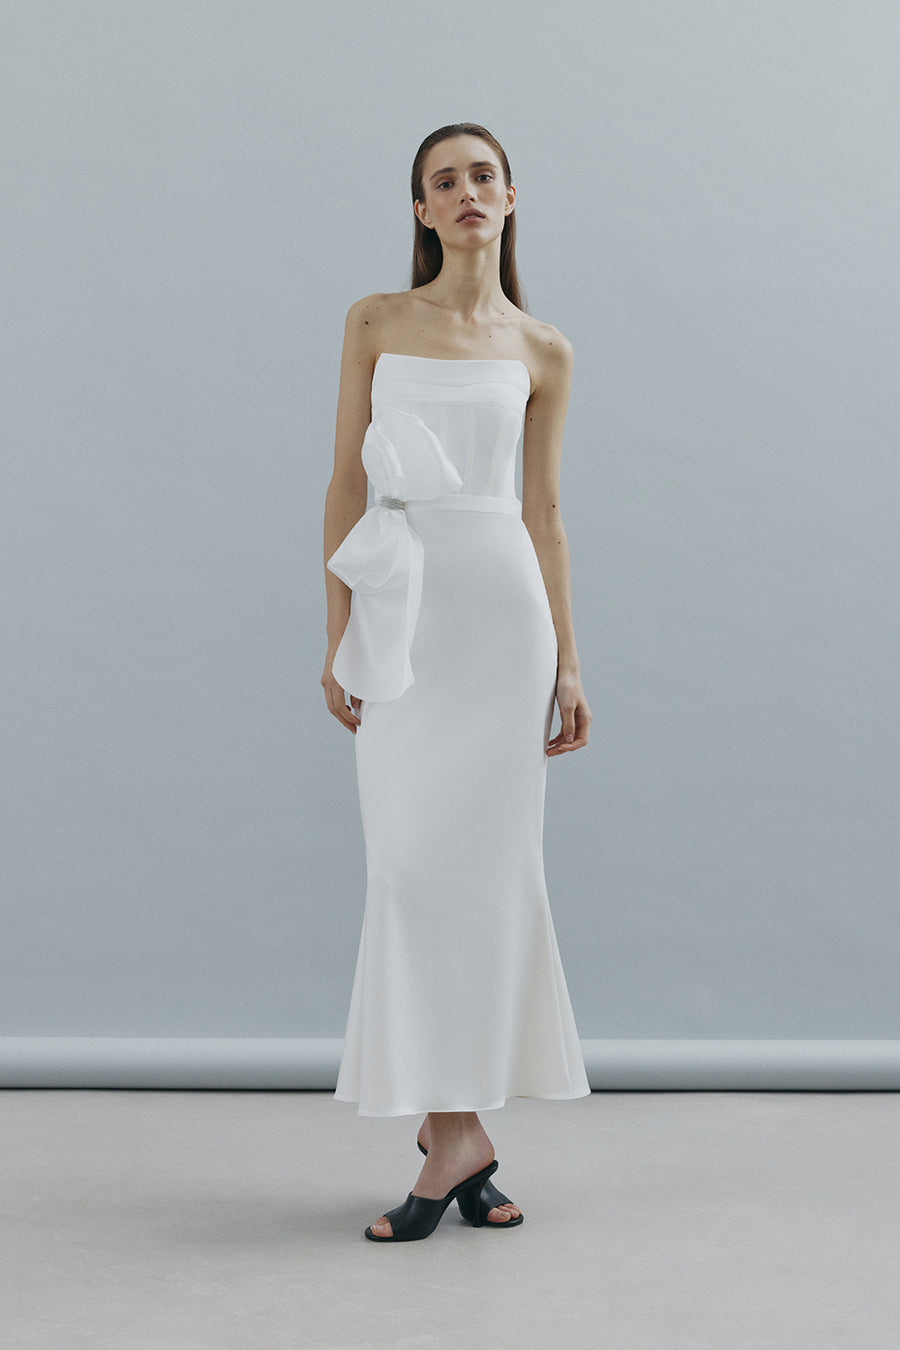 Structured corset dress with sculpted details – TOTAL WHITE